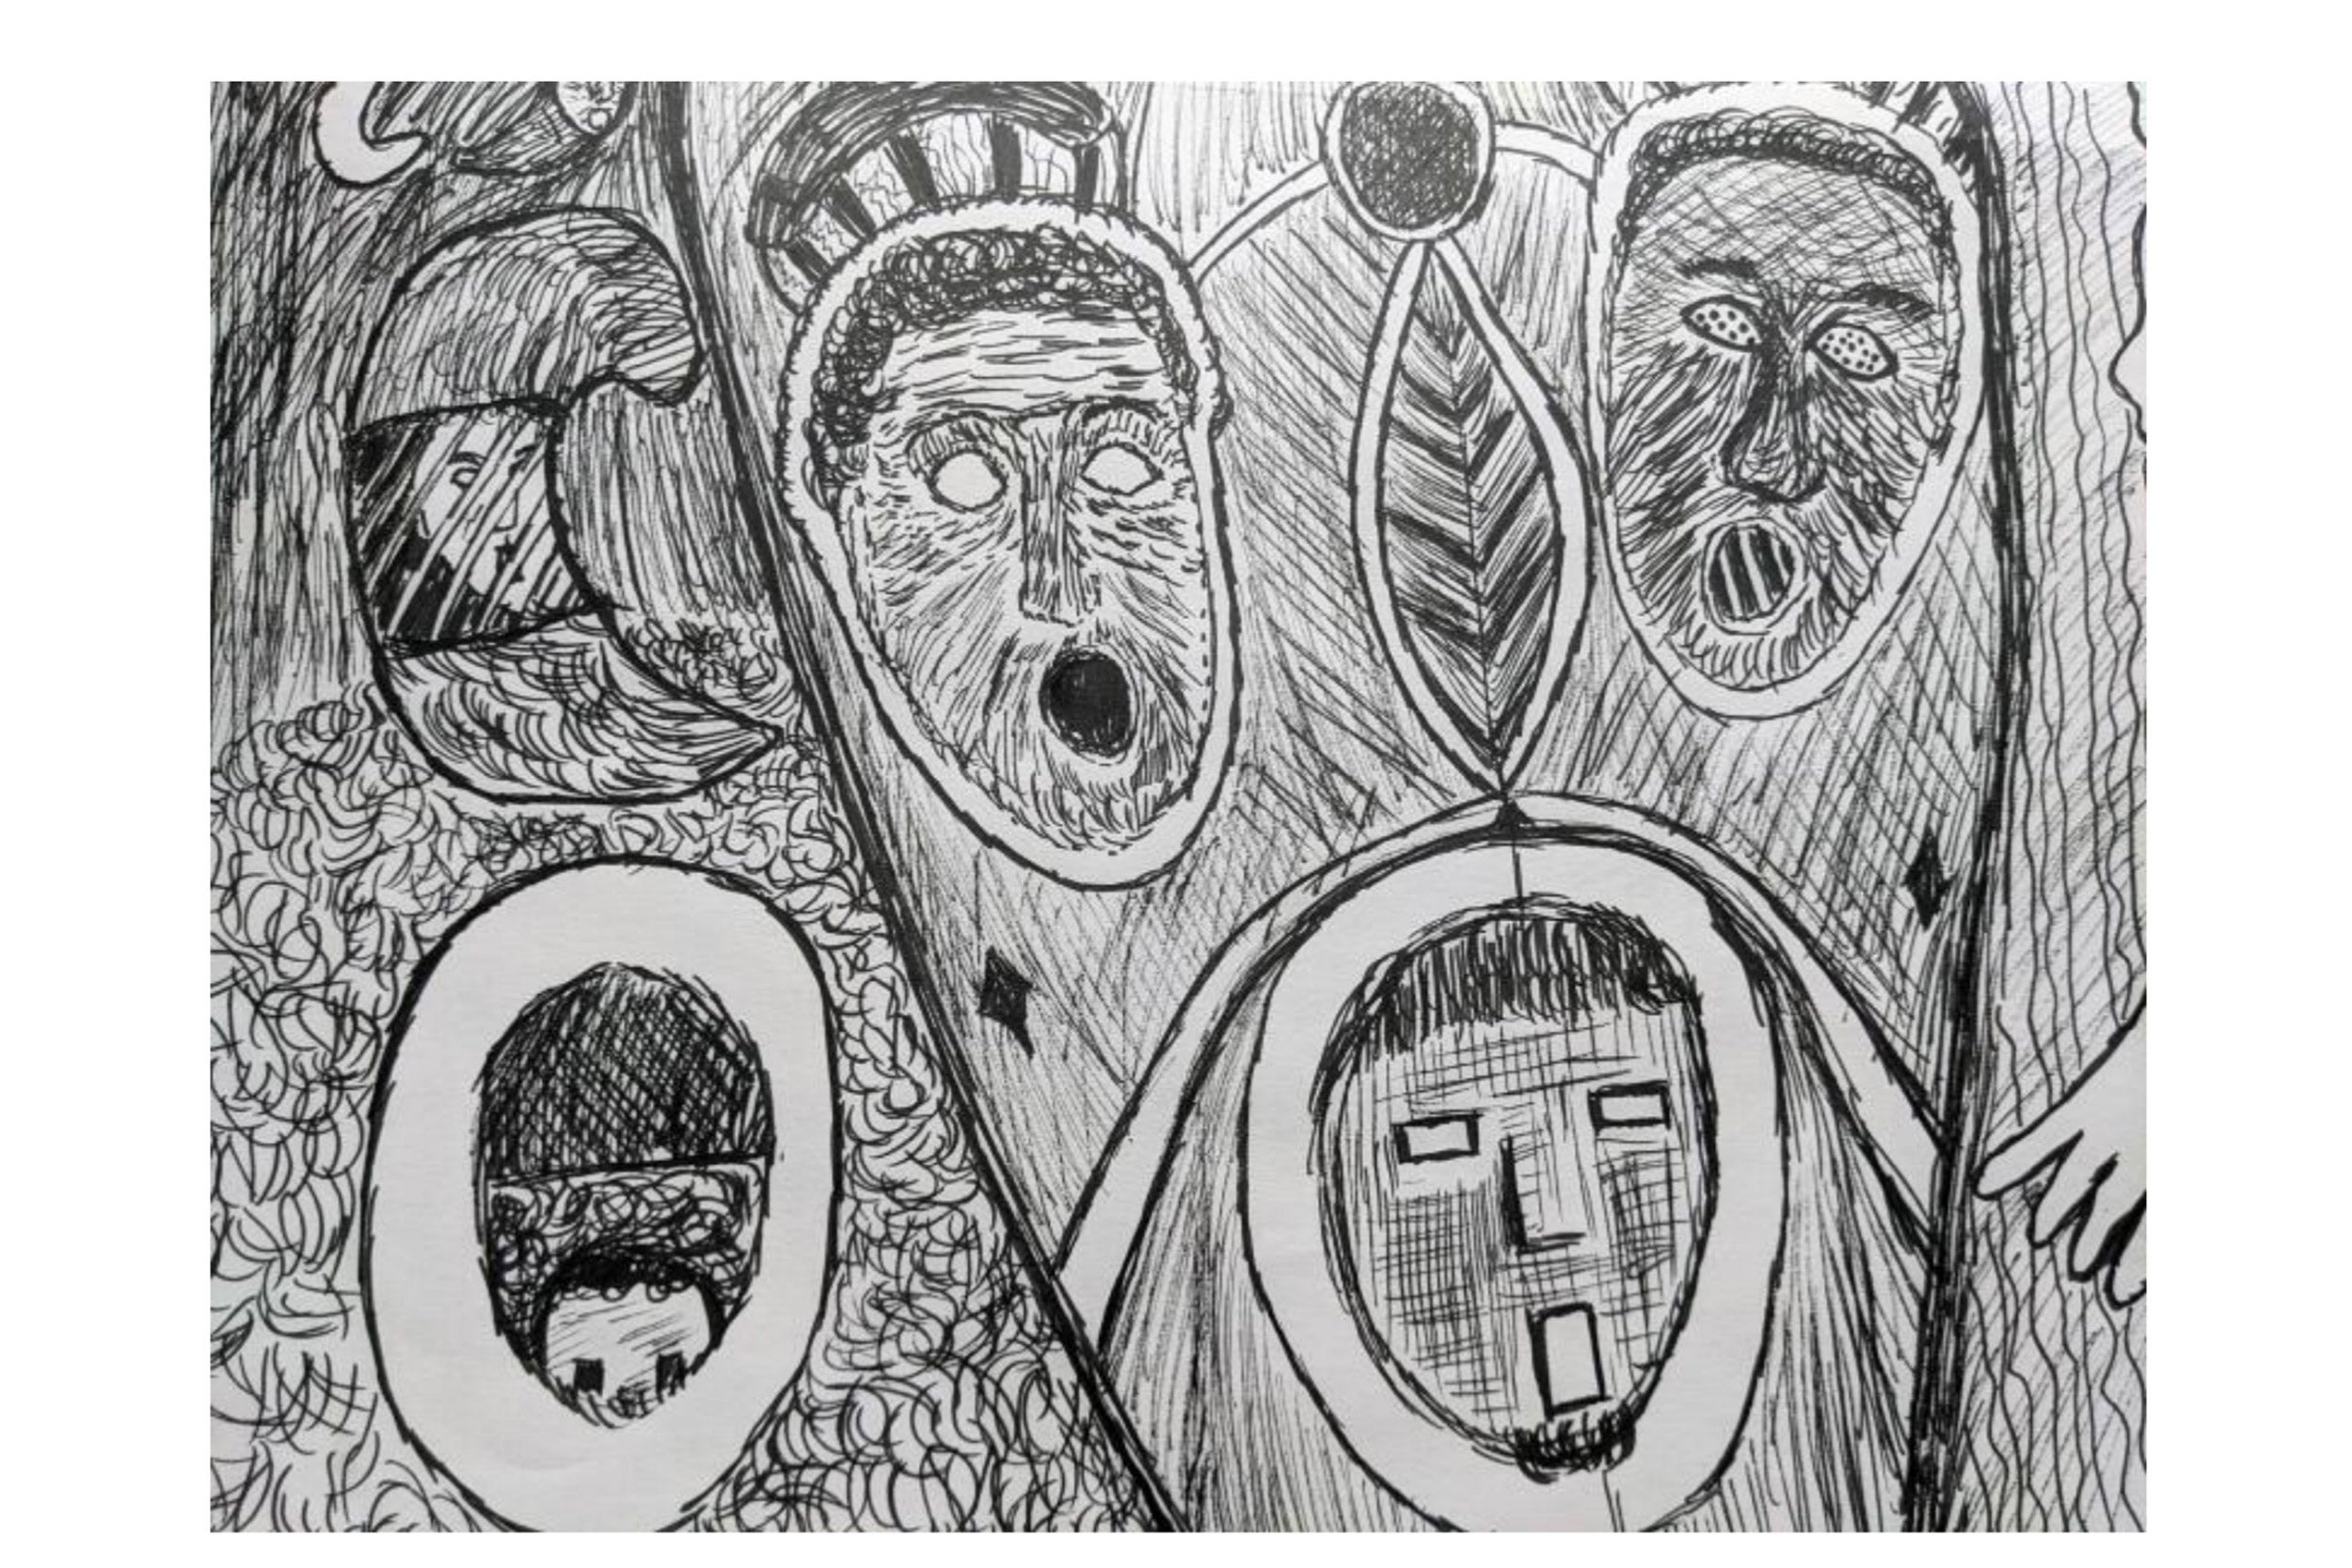 And Mari Megias’ ink drawing “Pandemic” is a collection of floating faces, their mouths agape.